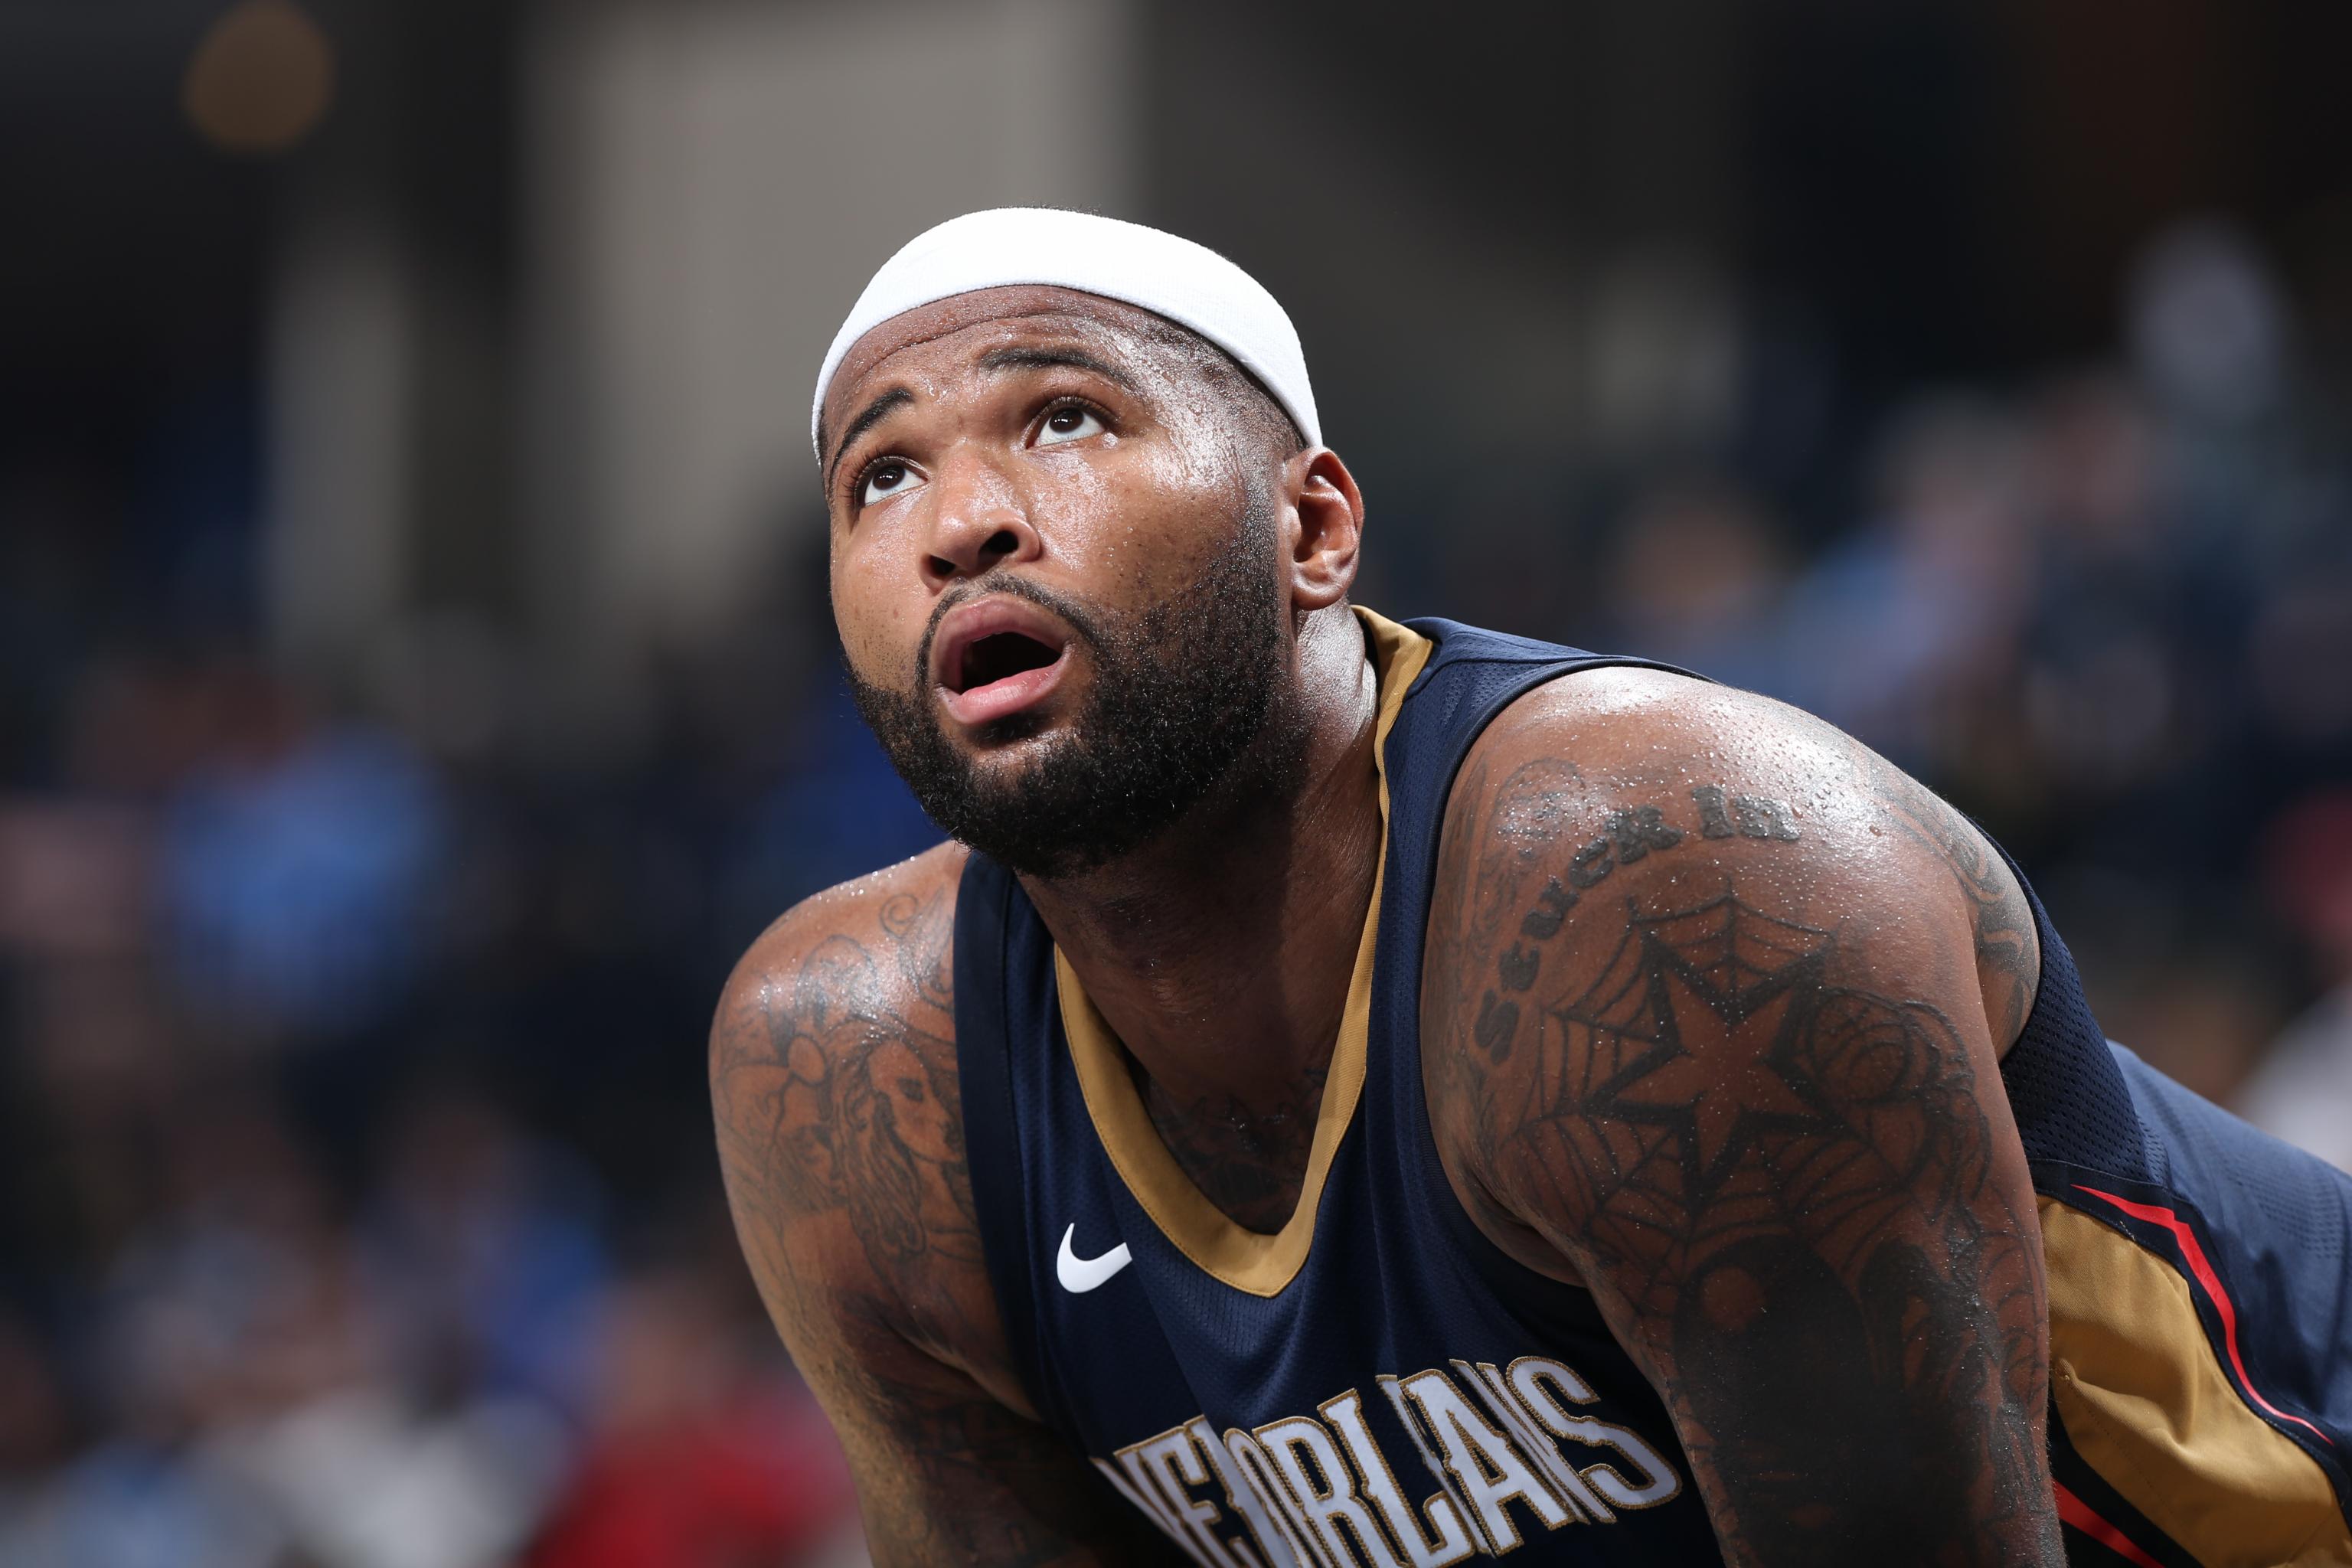 DeMarcus Cousins' outburst at a reporter puts the Kings in yet